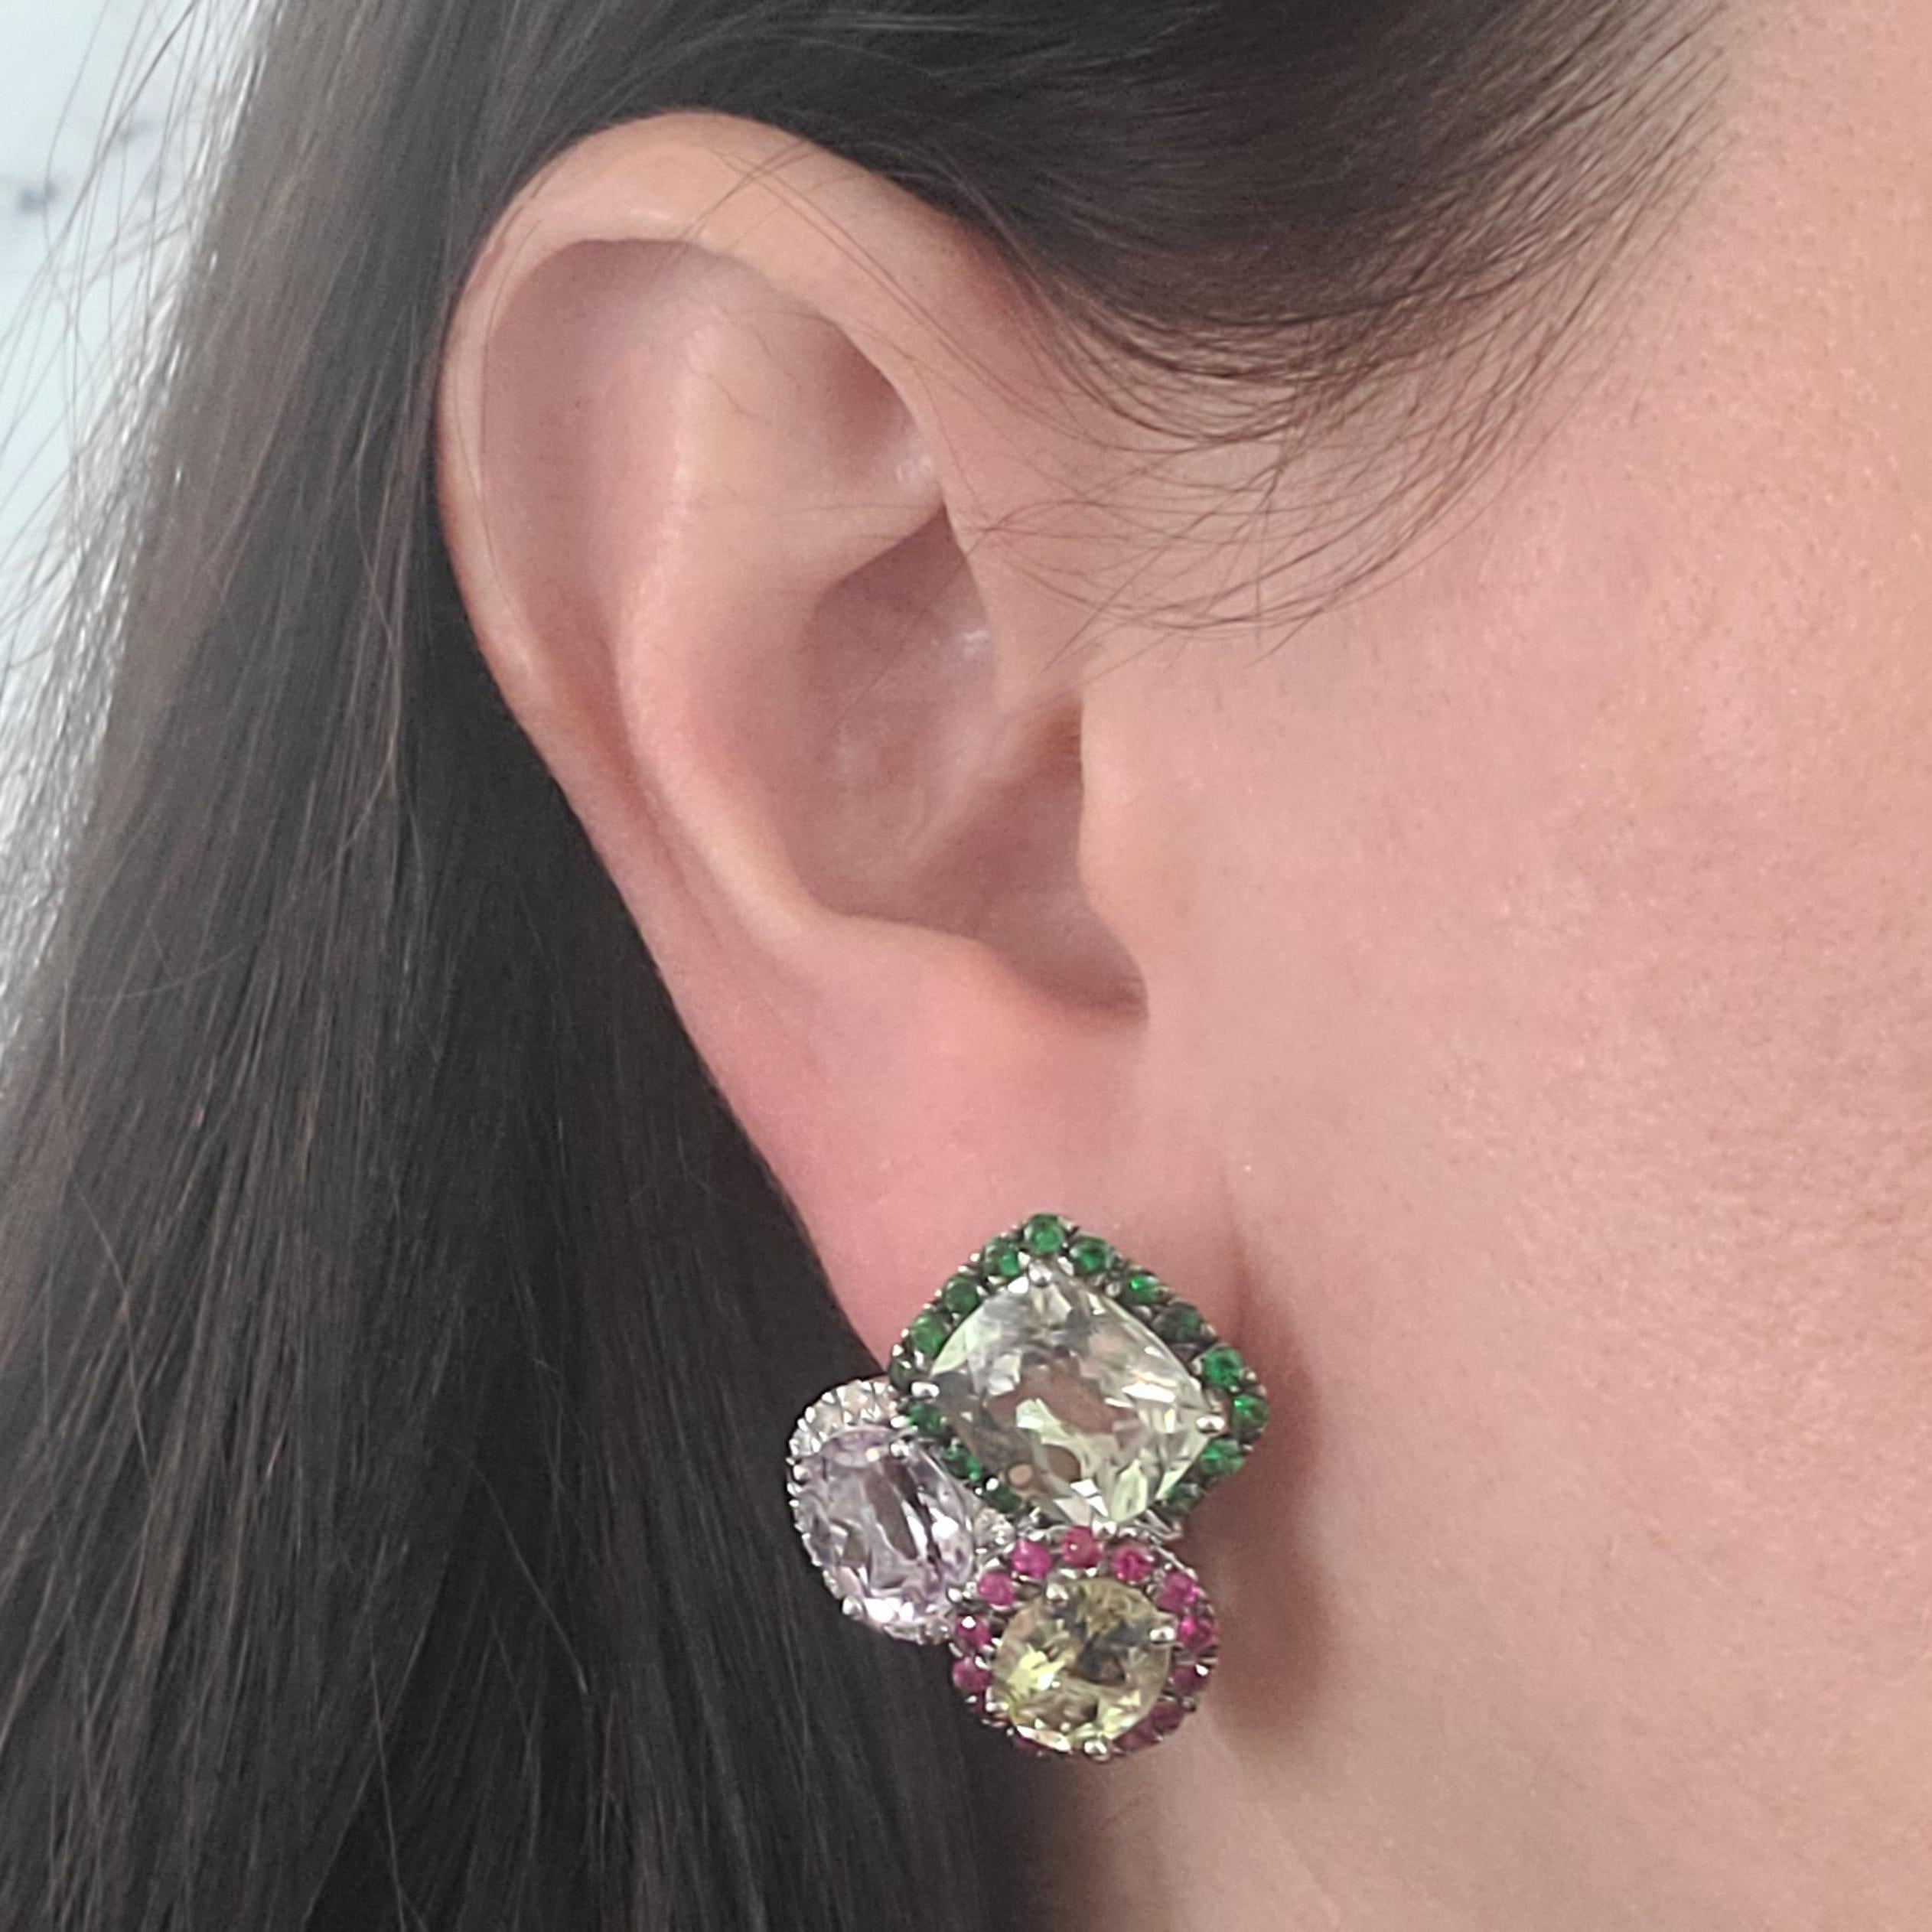 18 Karat White Gold Multicolor Gemstone Earrings Featuring Amethyst, Lemon Citrine, & Prasiolite Totaling Approximately 20 Carats Accented By Diamonds, Rubies, & Tsavorite Garnets Totaling An Additional 3 Carats. Omega Clip Back With Hinged Post.